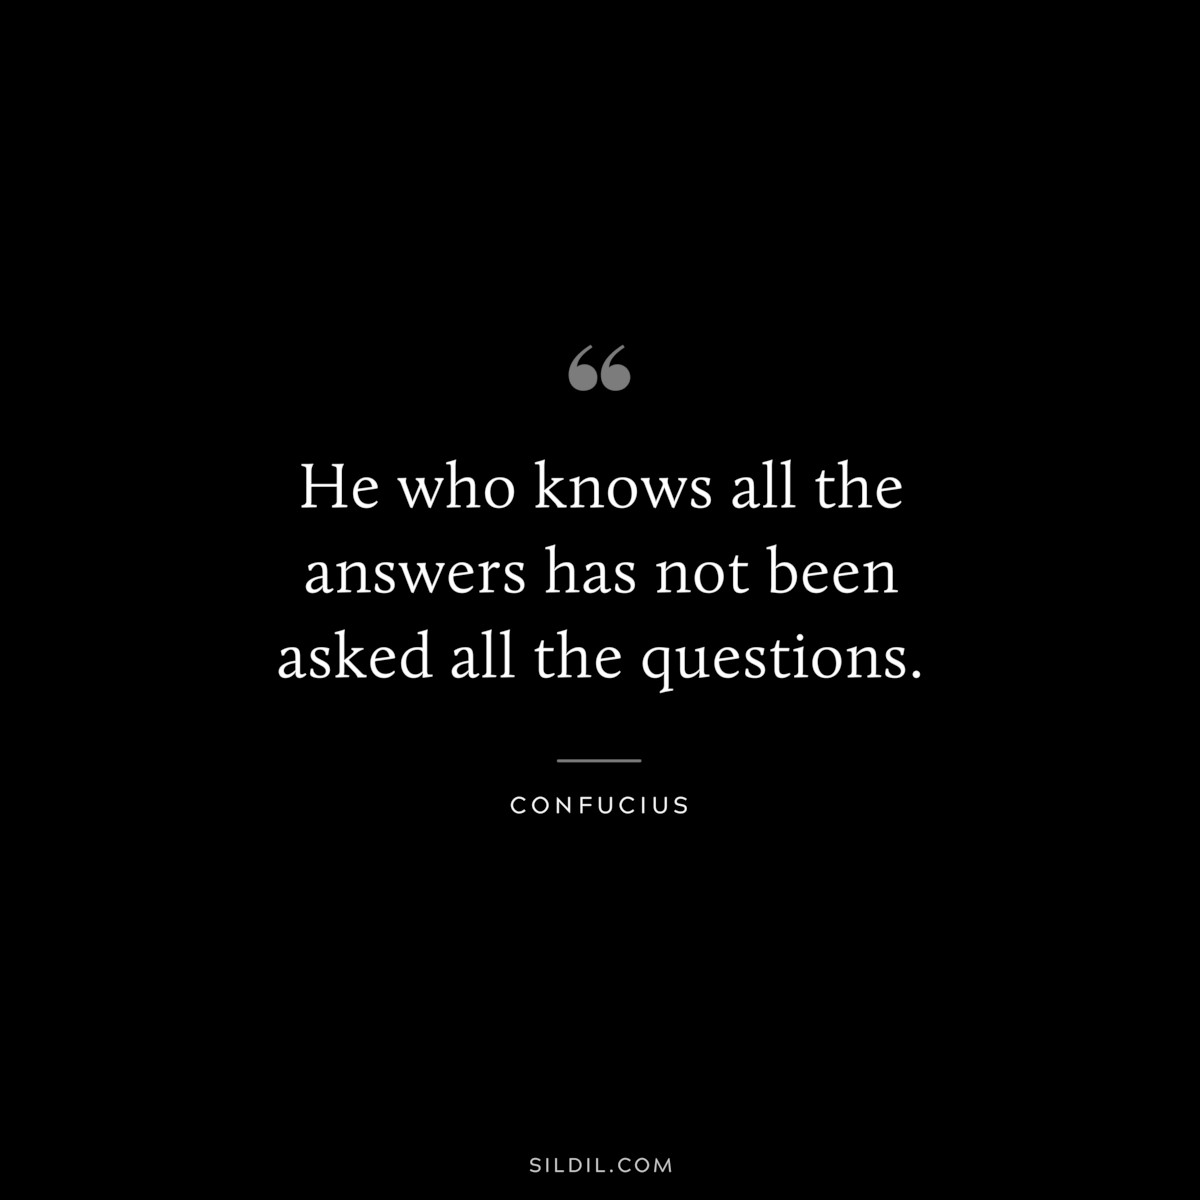 He who knows all the answers has not been asked all the questions. ― Confucius